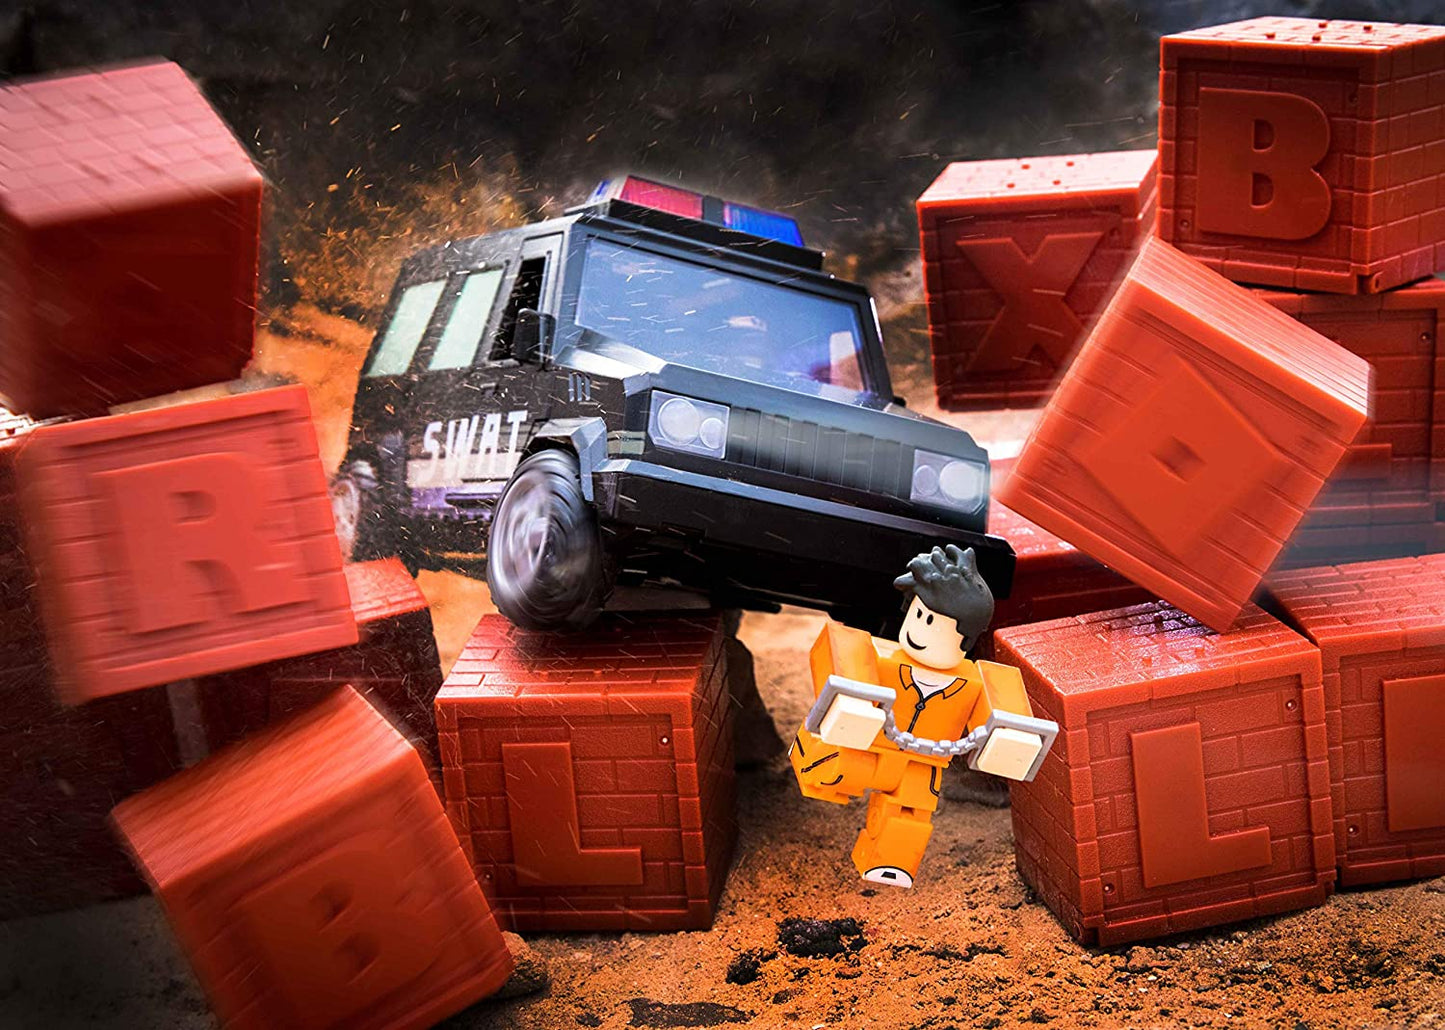 Roblox Action Collection - Jailbreak: SWAT Unit Vehicle with Exclusive Virtual Item